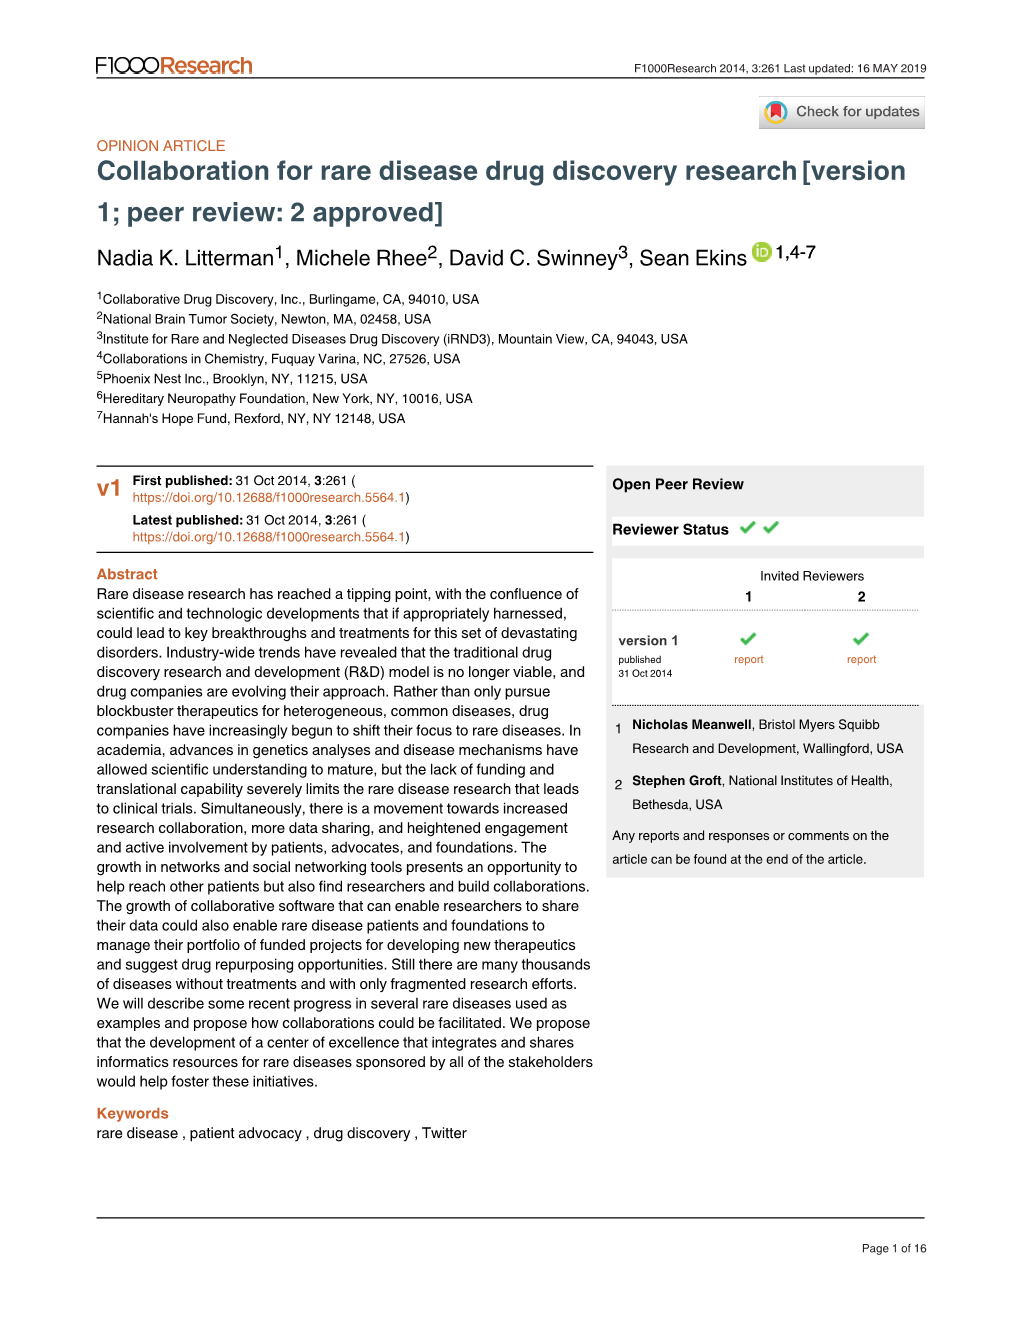 Collaboration for Rare Disease Drug Discovery Research[Version 1; Peer